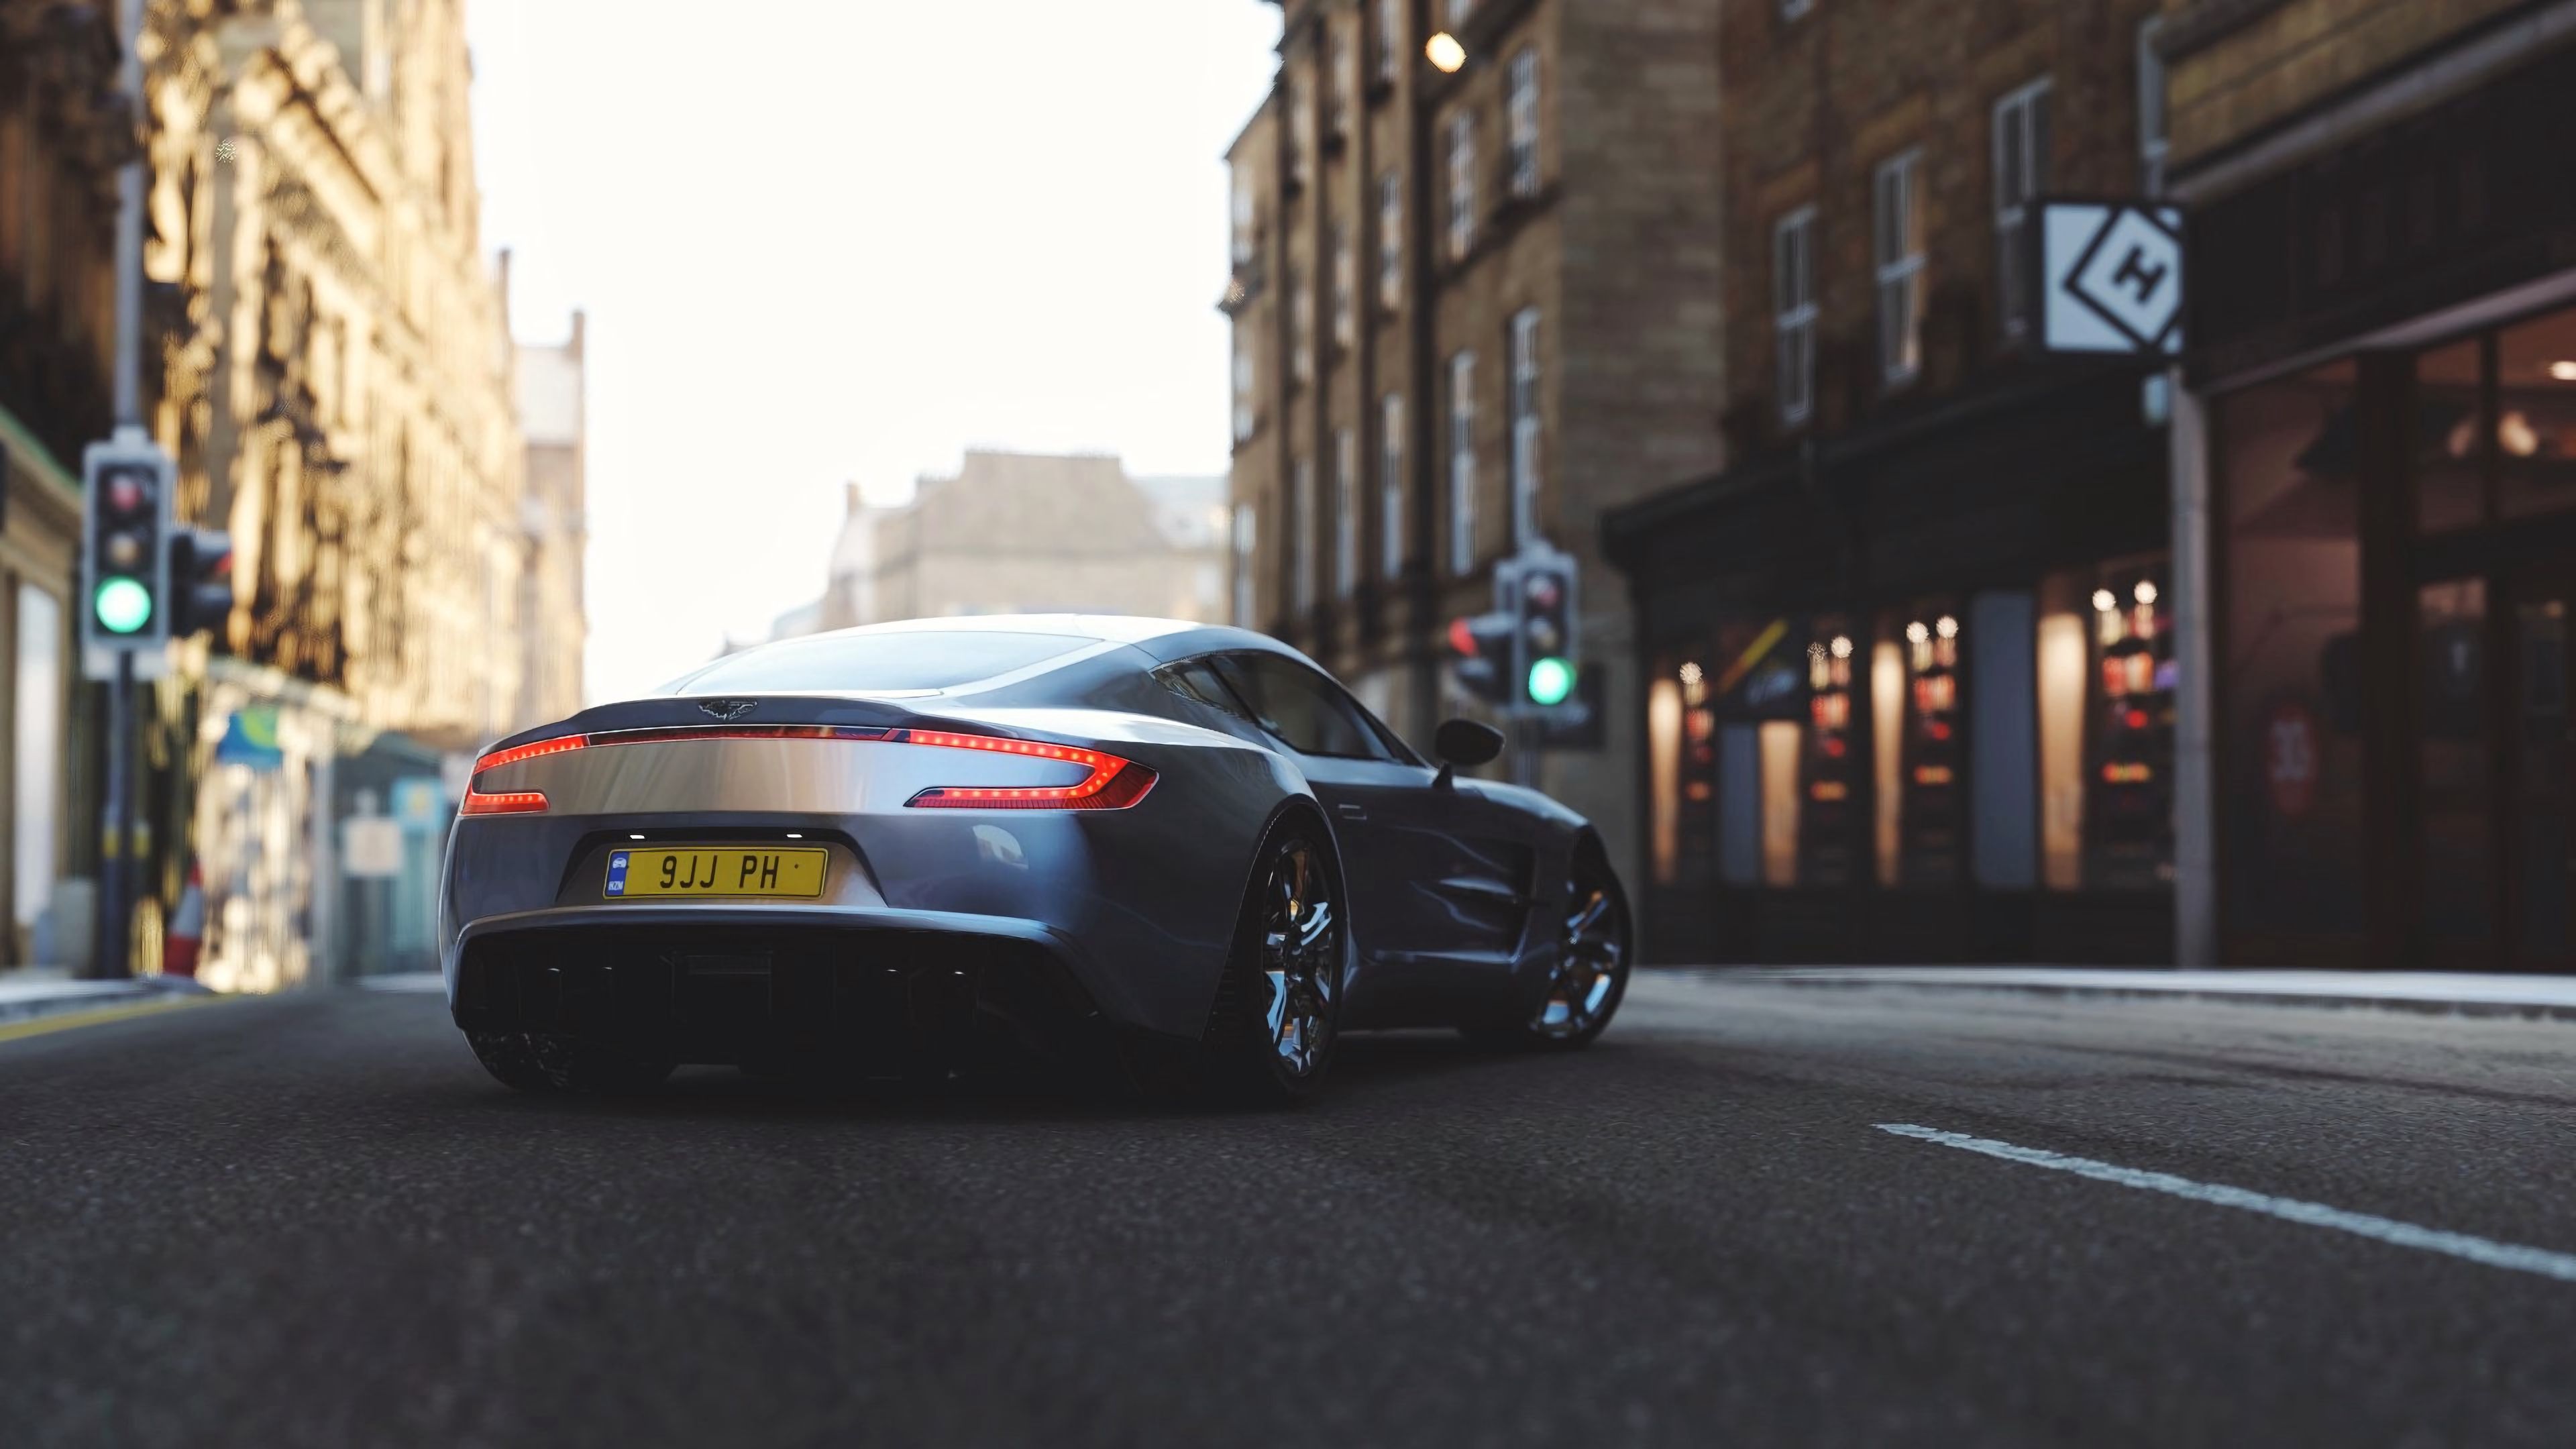 android sports car, side view, cars, aston martin one 77, sports, aston martin